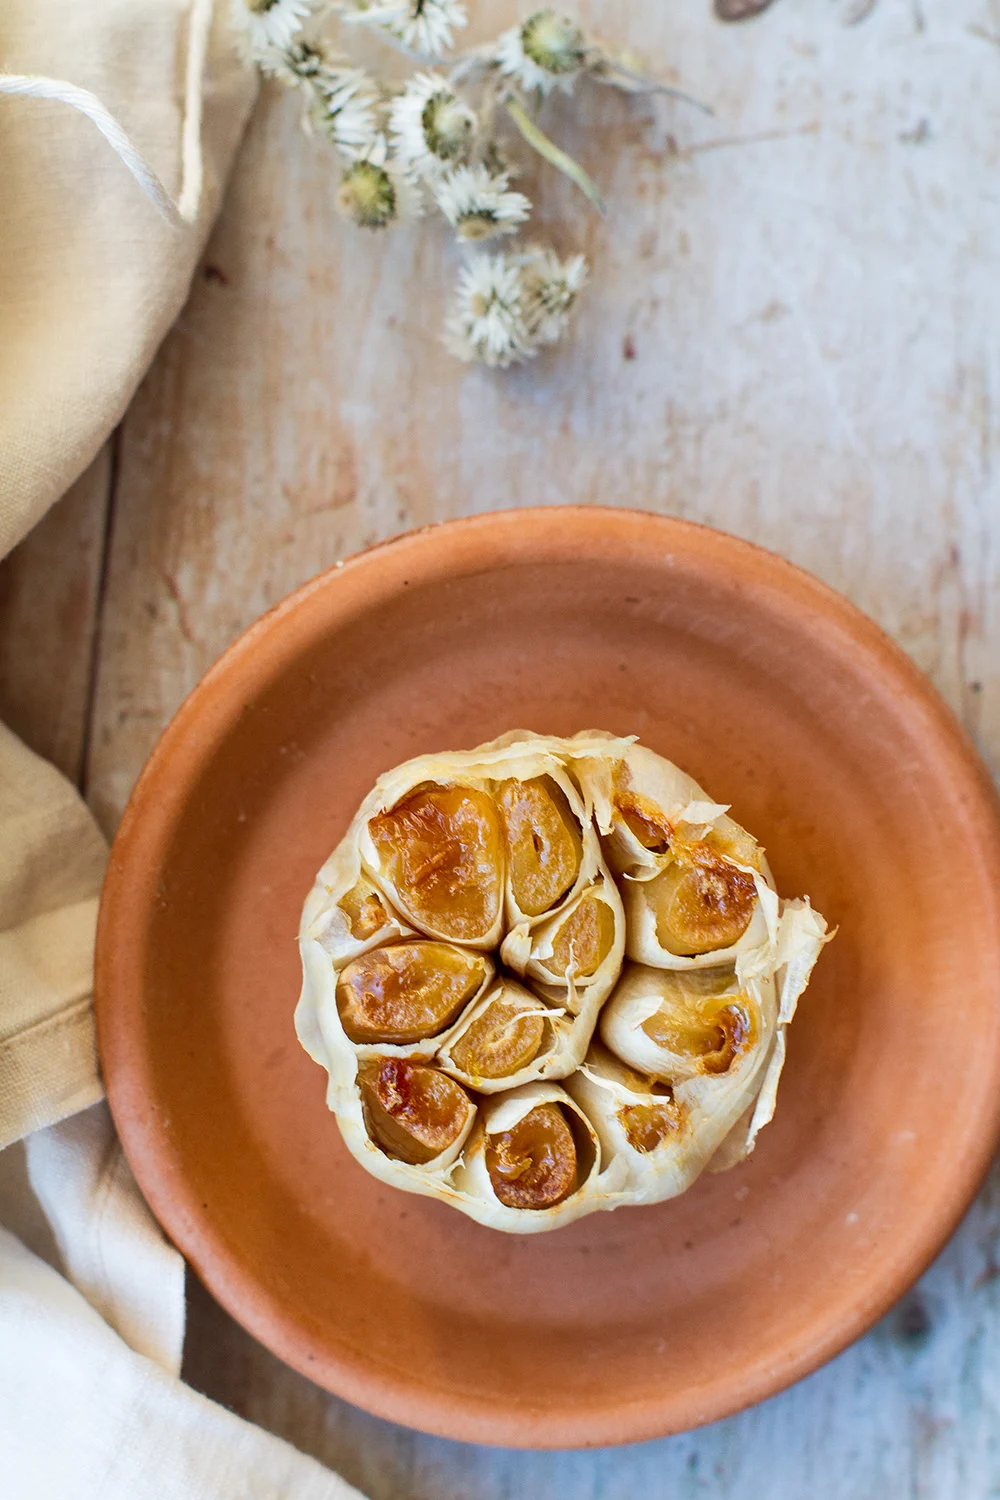 Roasted garlic on a small terracotta plate.